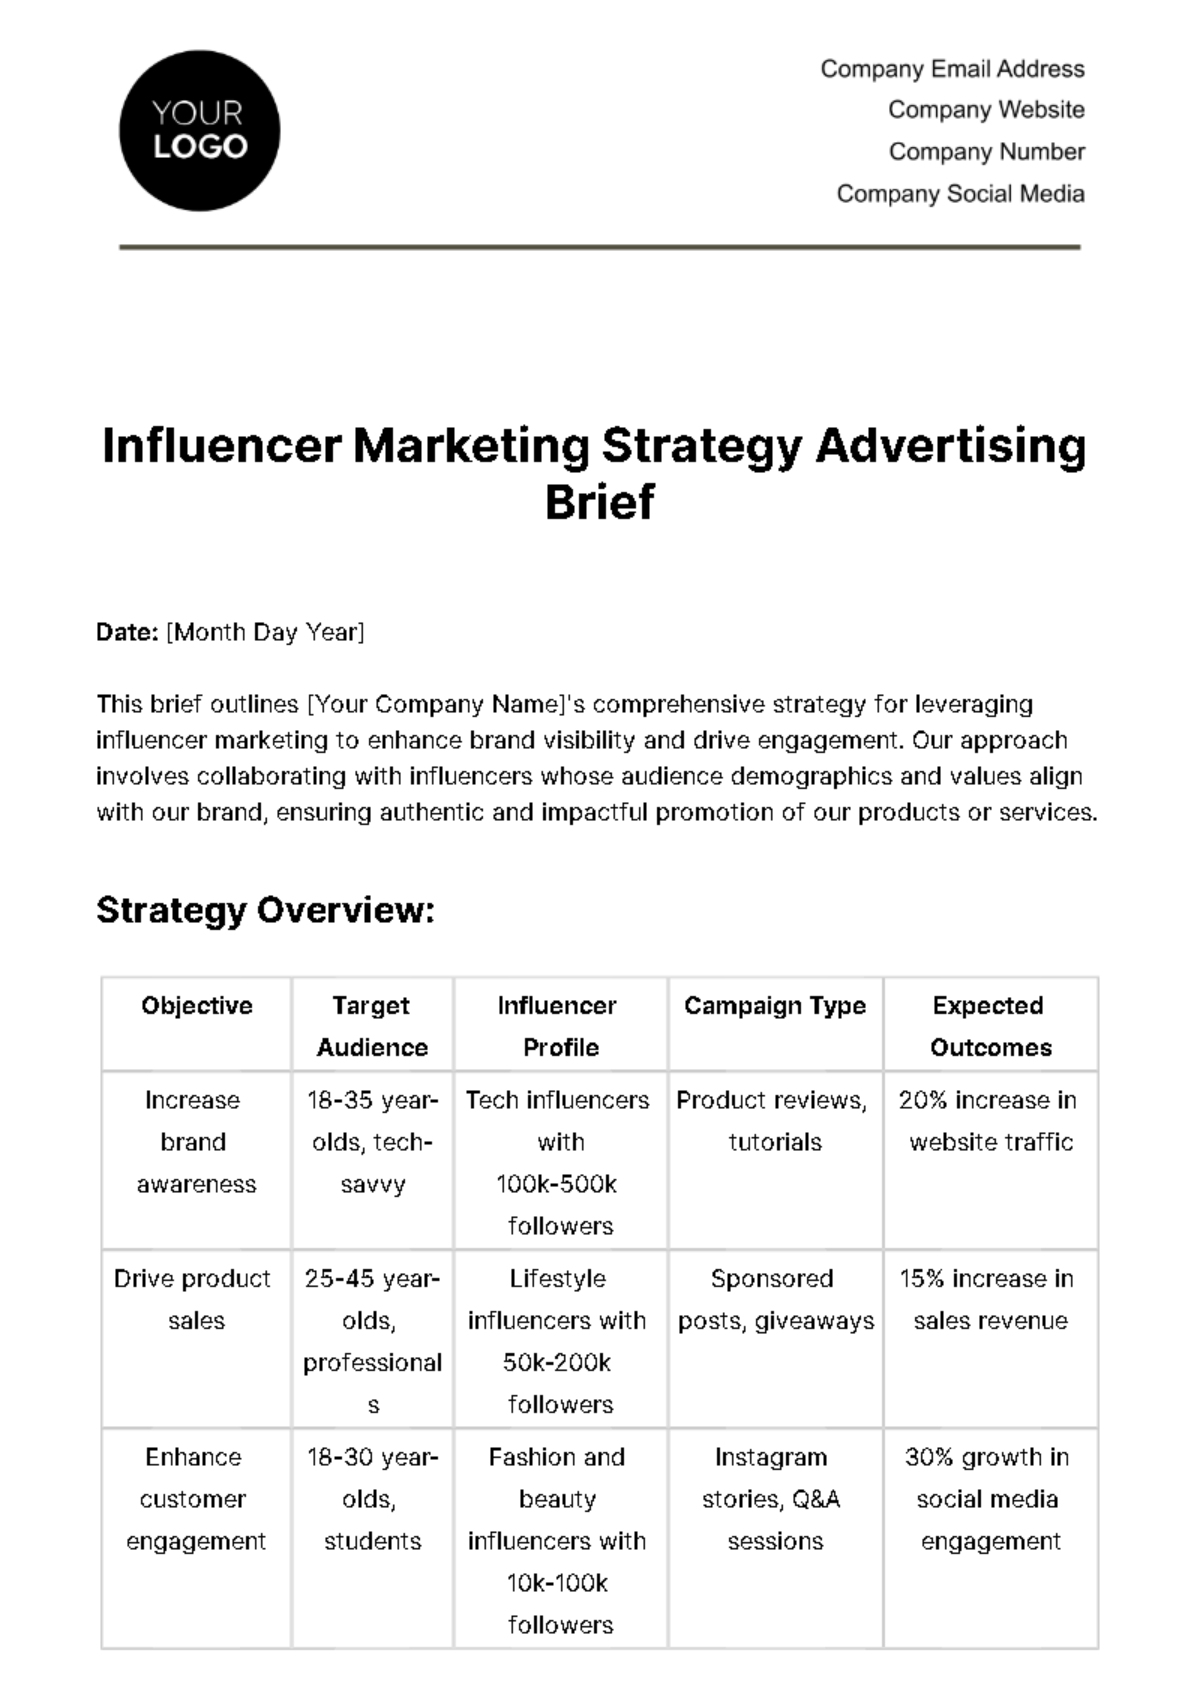 Influencer Marketing Strategy Advertising Brief Template